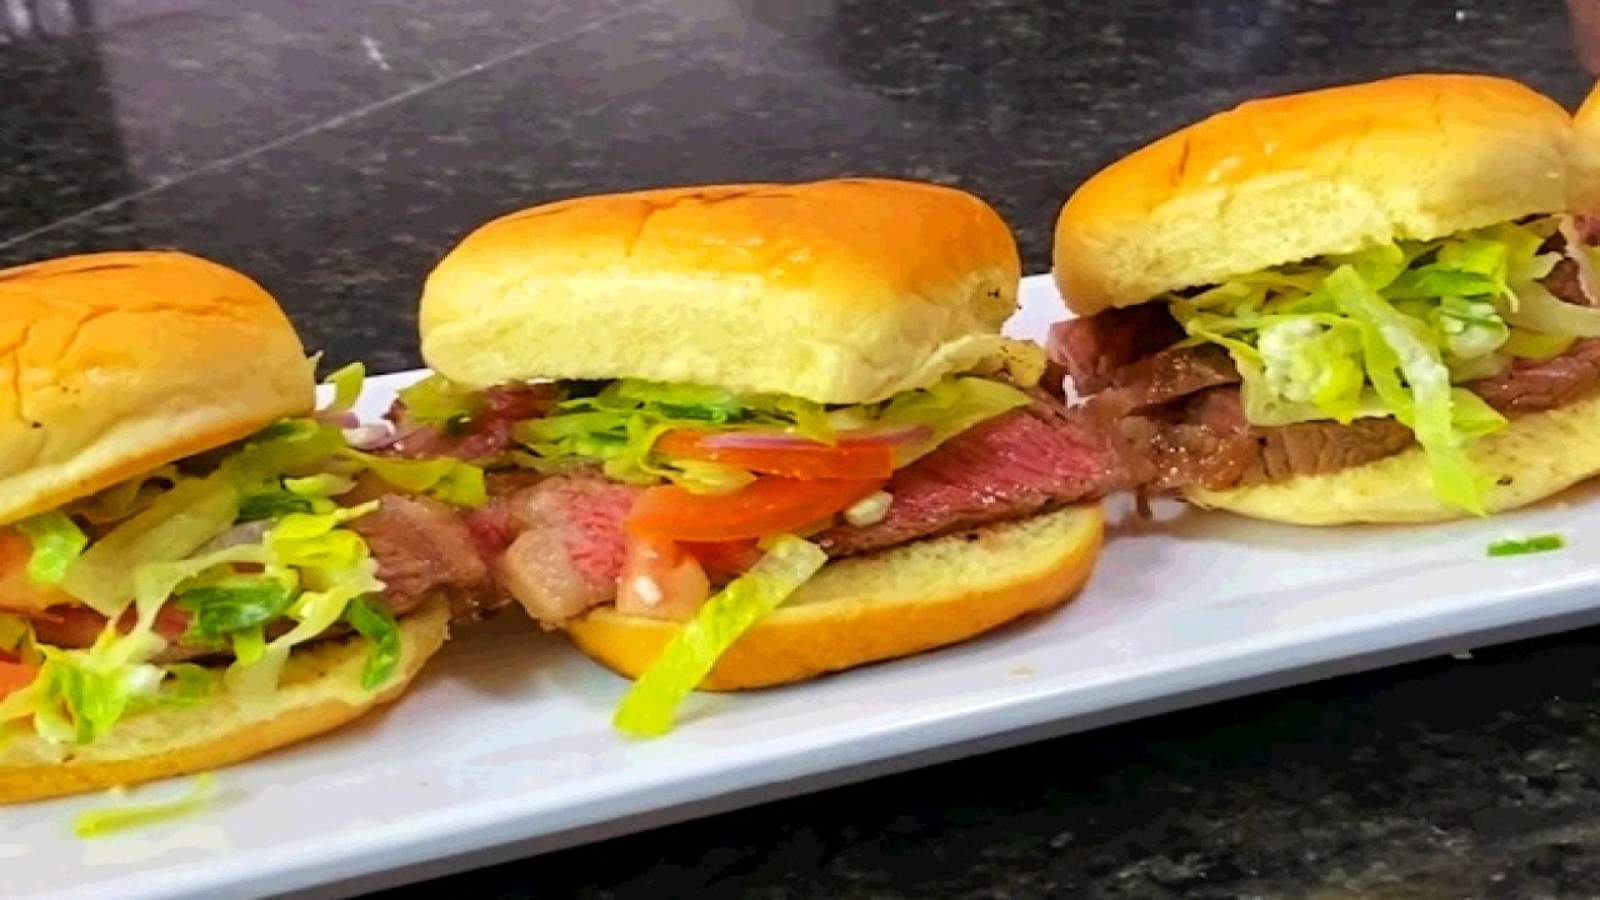 Recipes: Ribeye sliders, grilled shrimp salad + watermelon with mint, lime